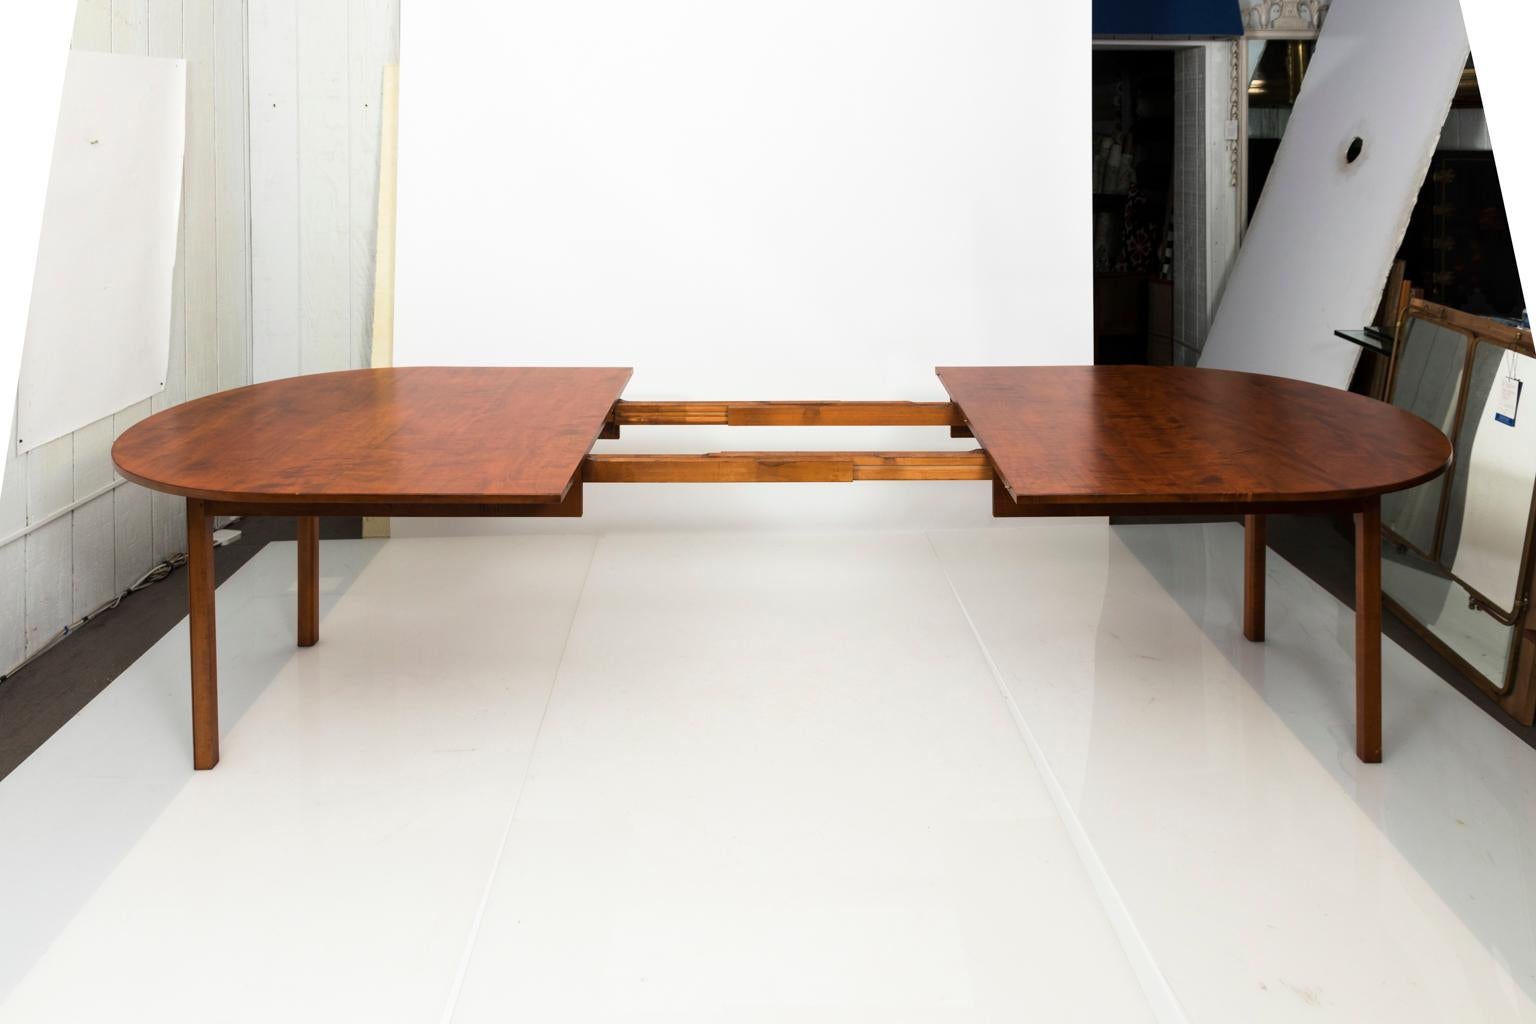 Tiger Maple Dining Room Table by David Lefort, circa 2000 5